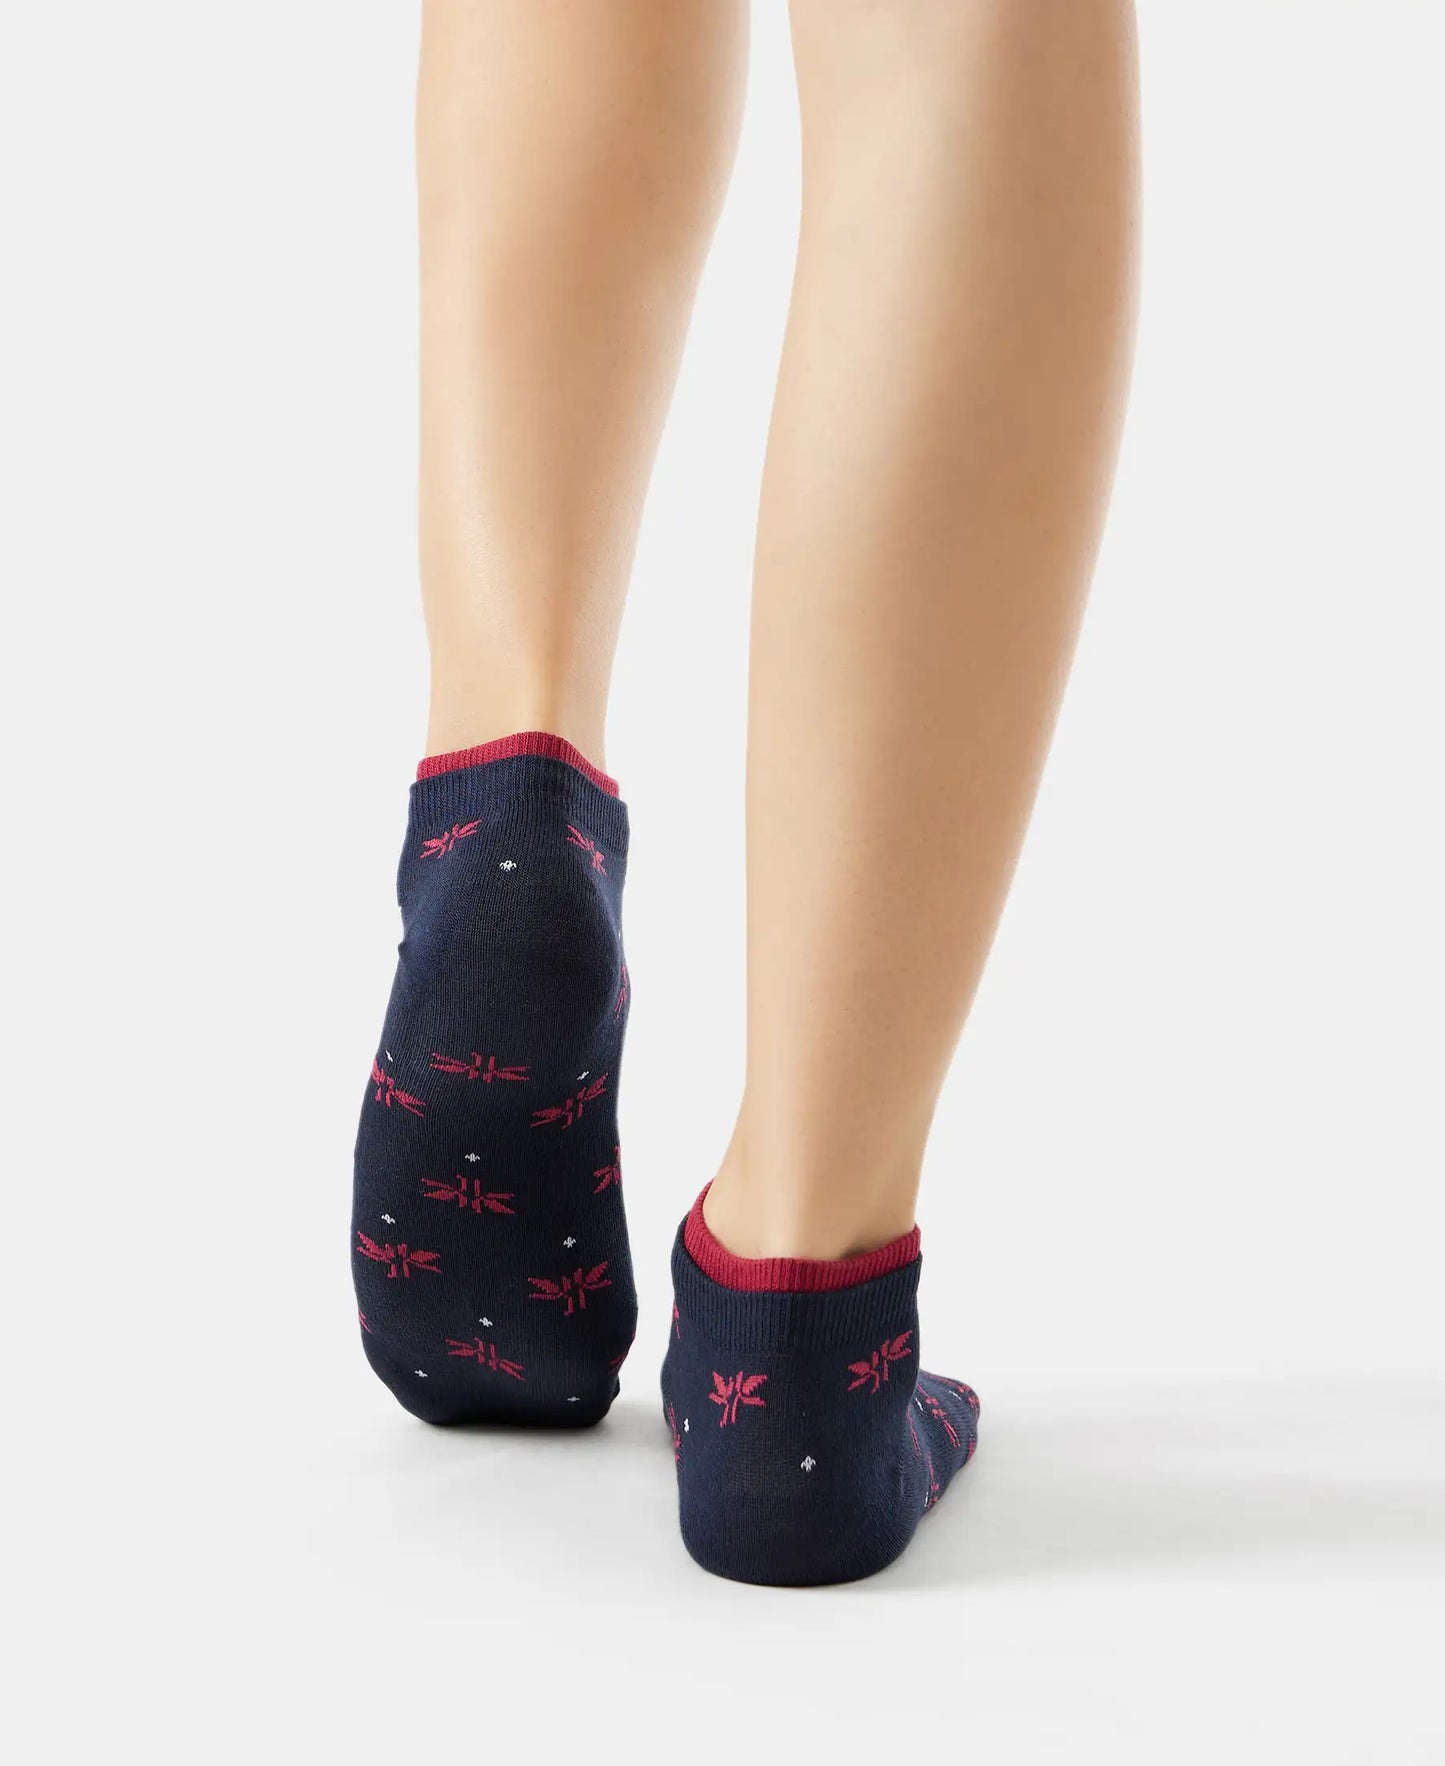 Compact Cotton Stretch Low Show Socks with StayFresh Treatment - Navy & Beet Red (Pack of 2)